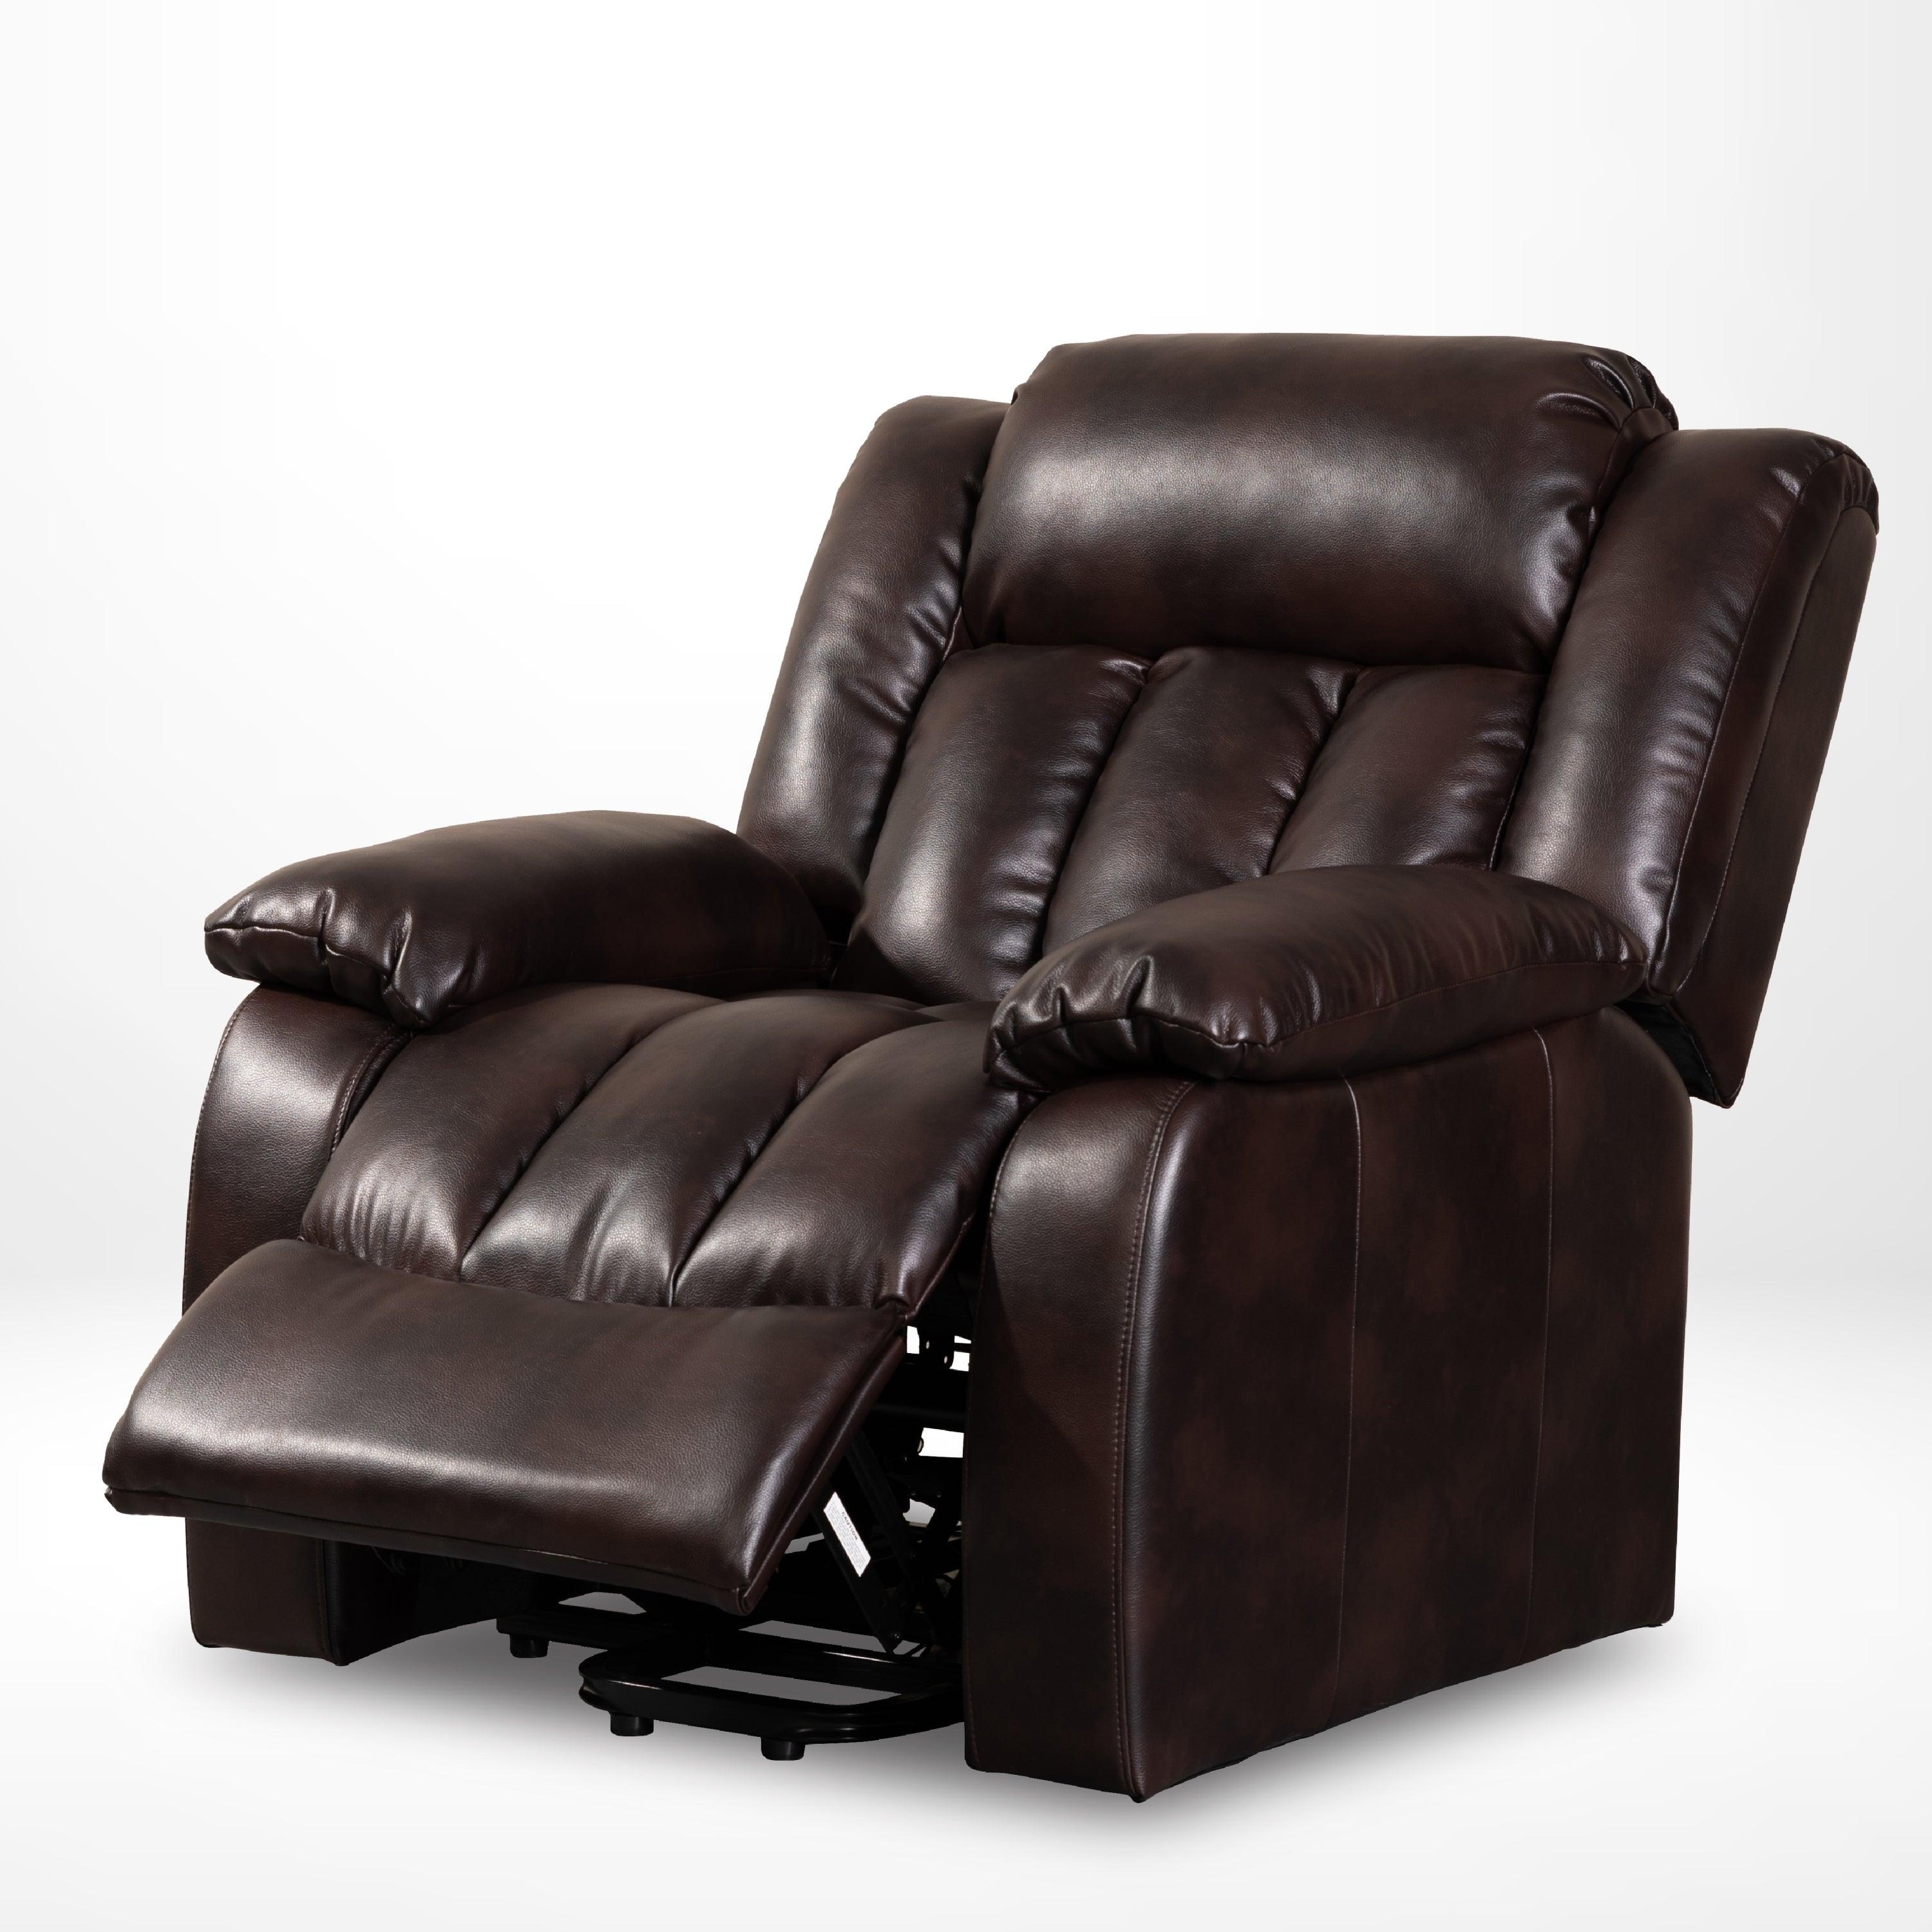 Red Brown Lift Chair Recliner, reclined